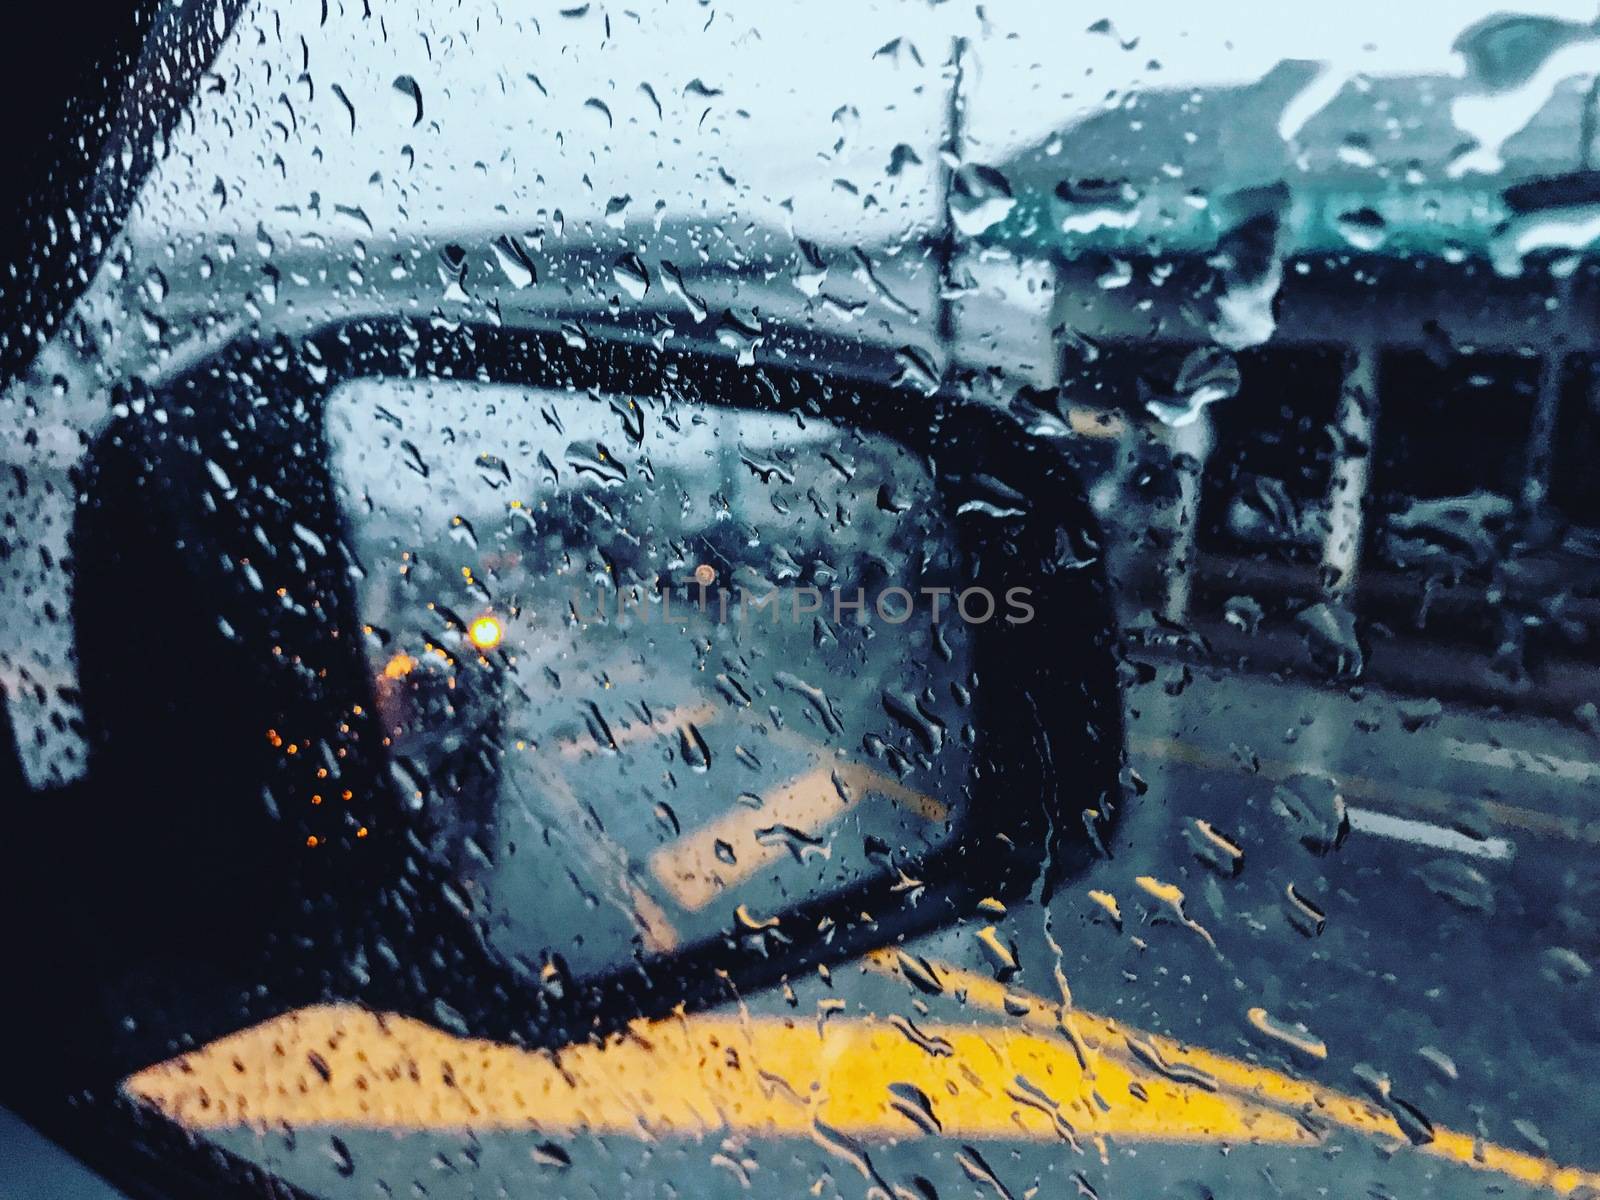 Drops of rain fell on the glass of the car, there was a blurry scene. by aekgasit